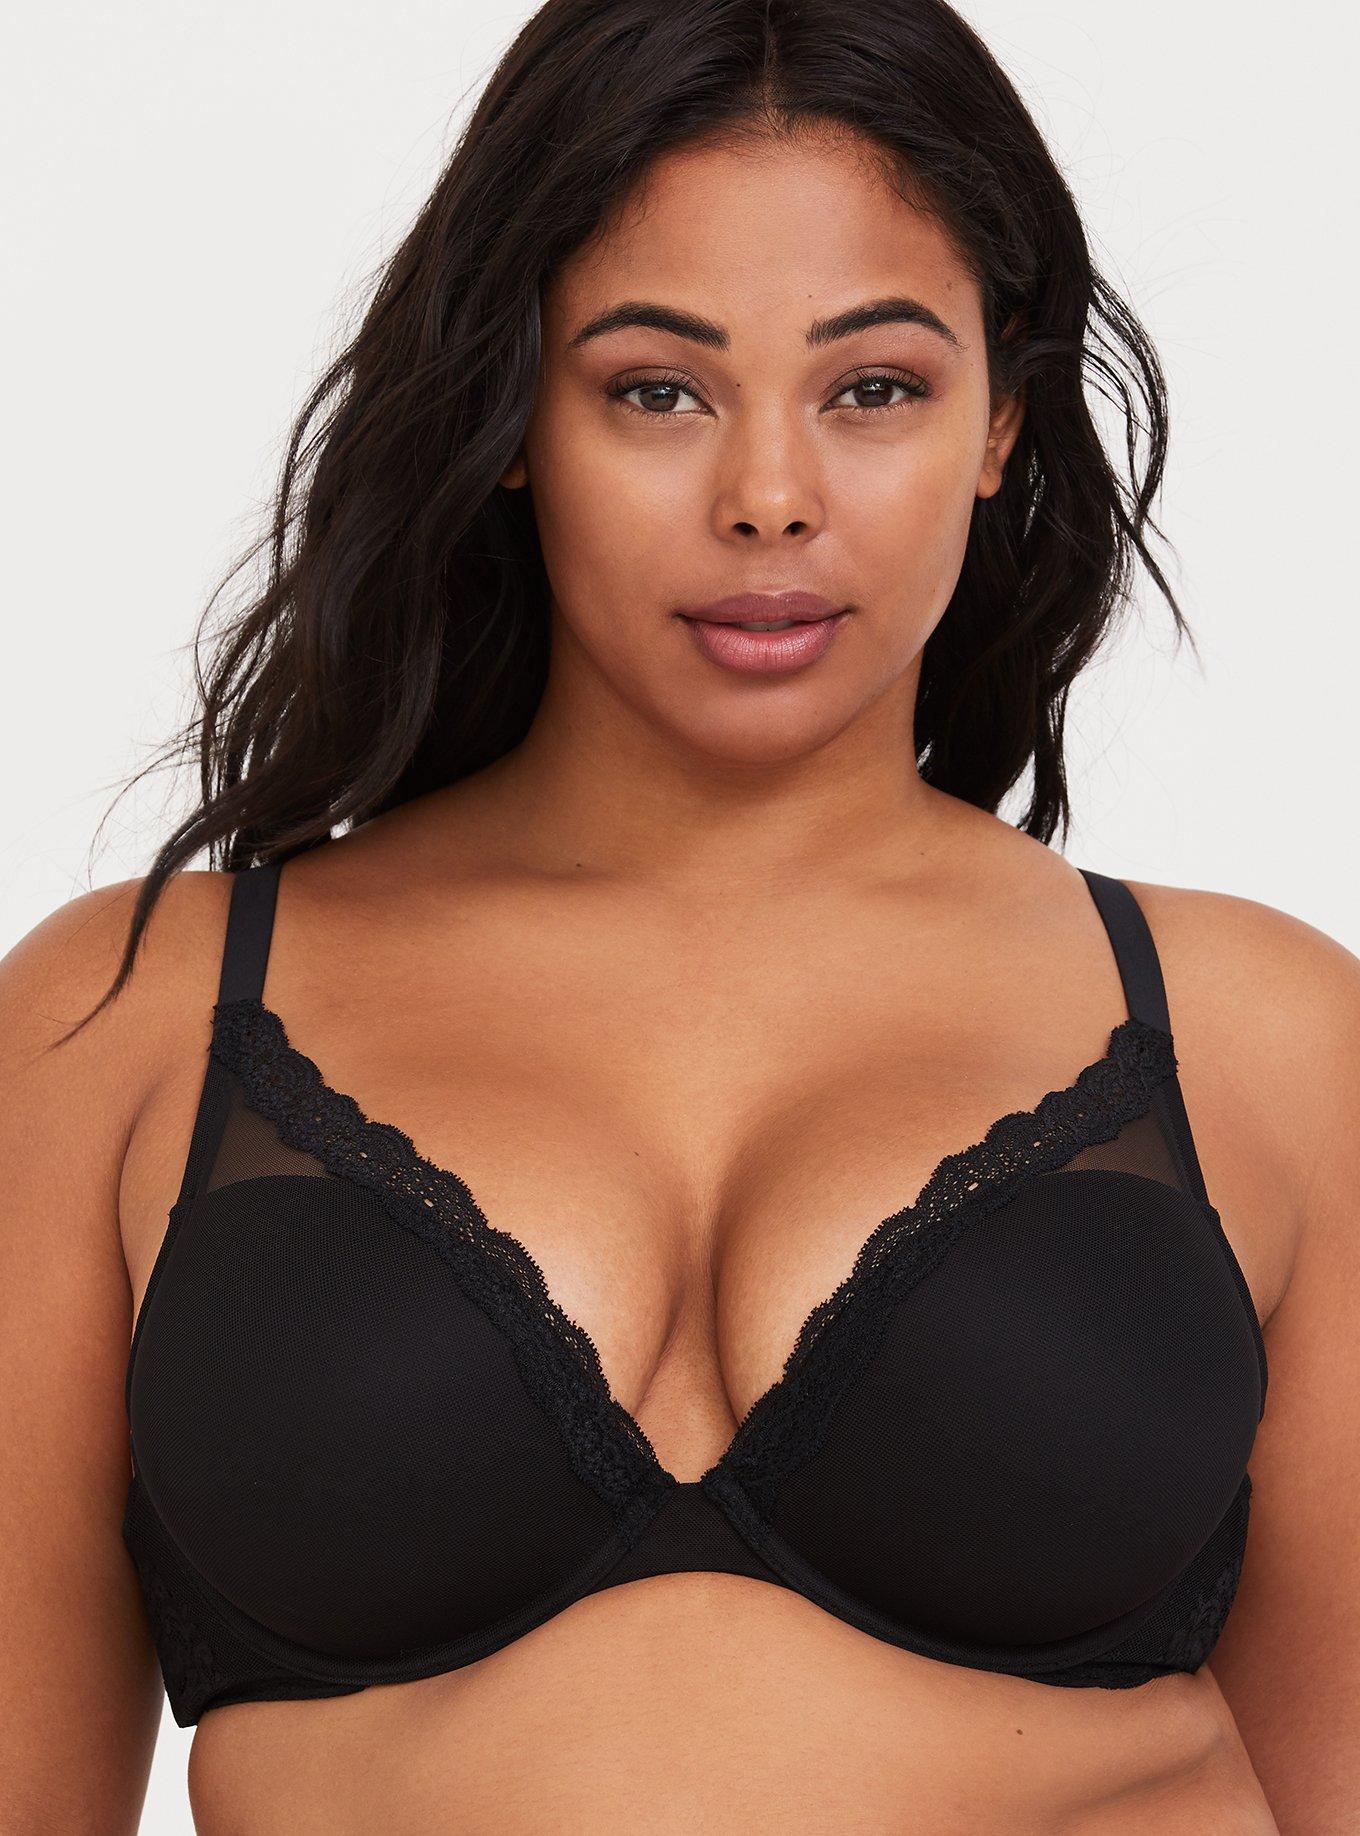 Torrid Women's Plus Size Nude Push-Up Plunge Bra With No-Show Lace